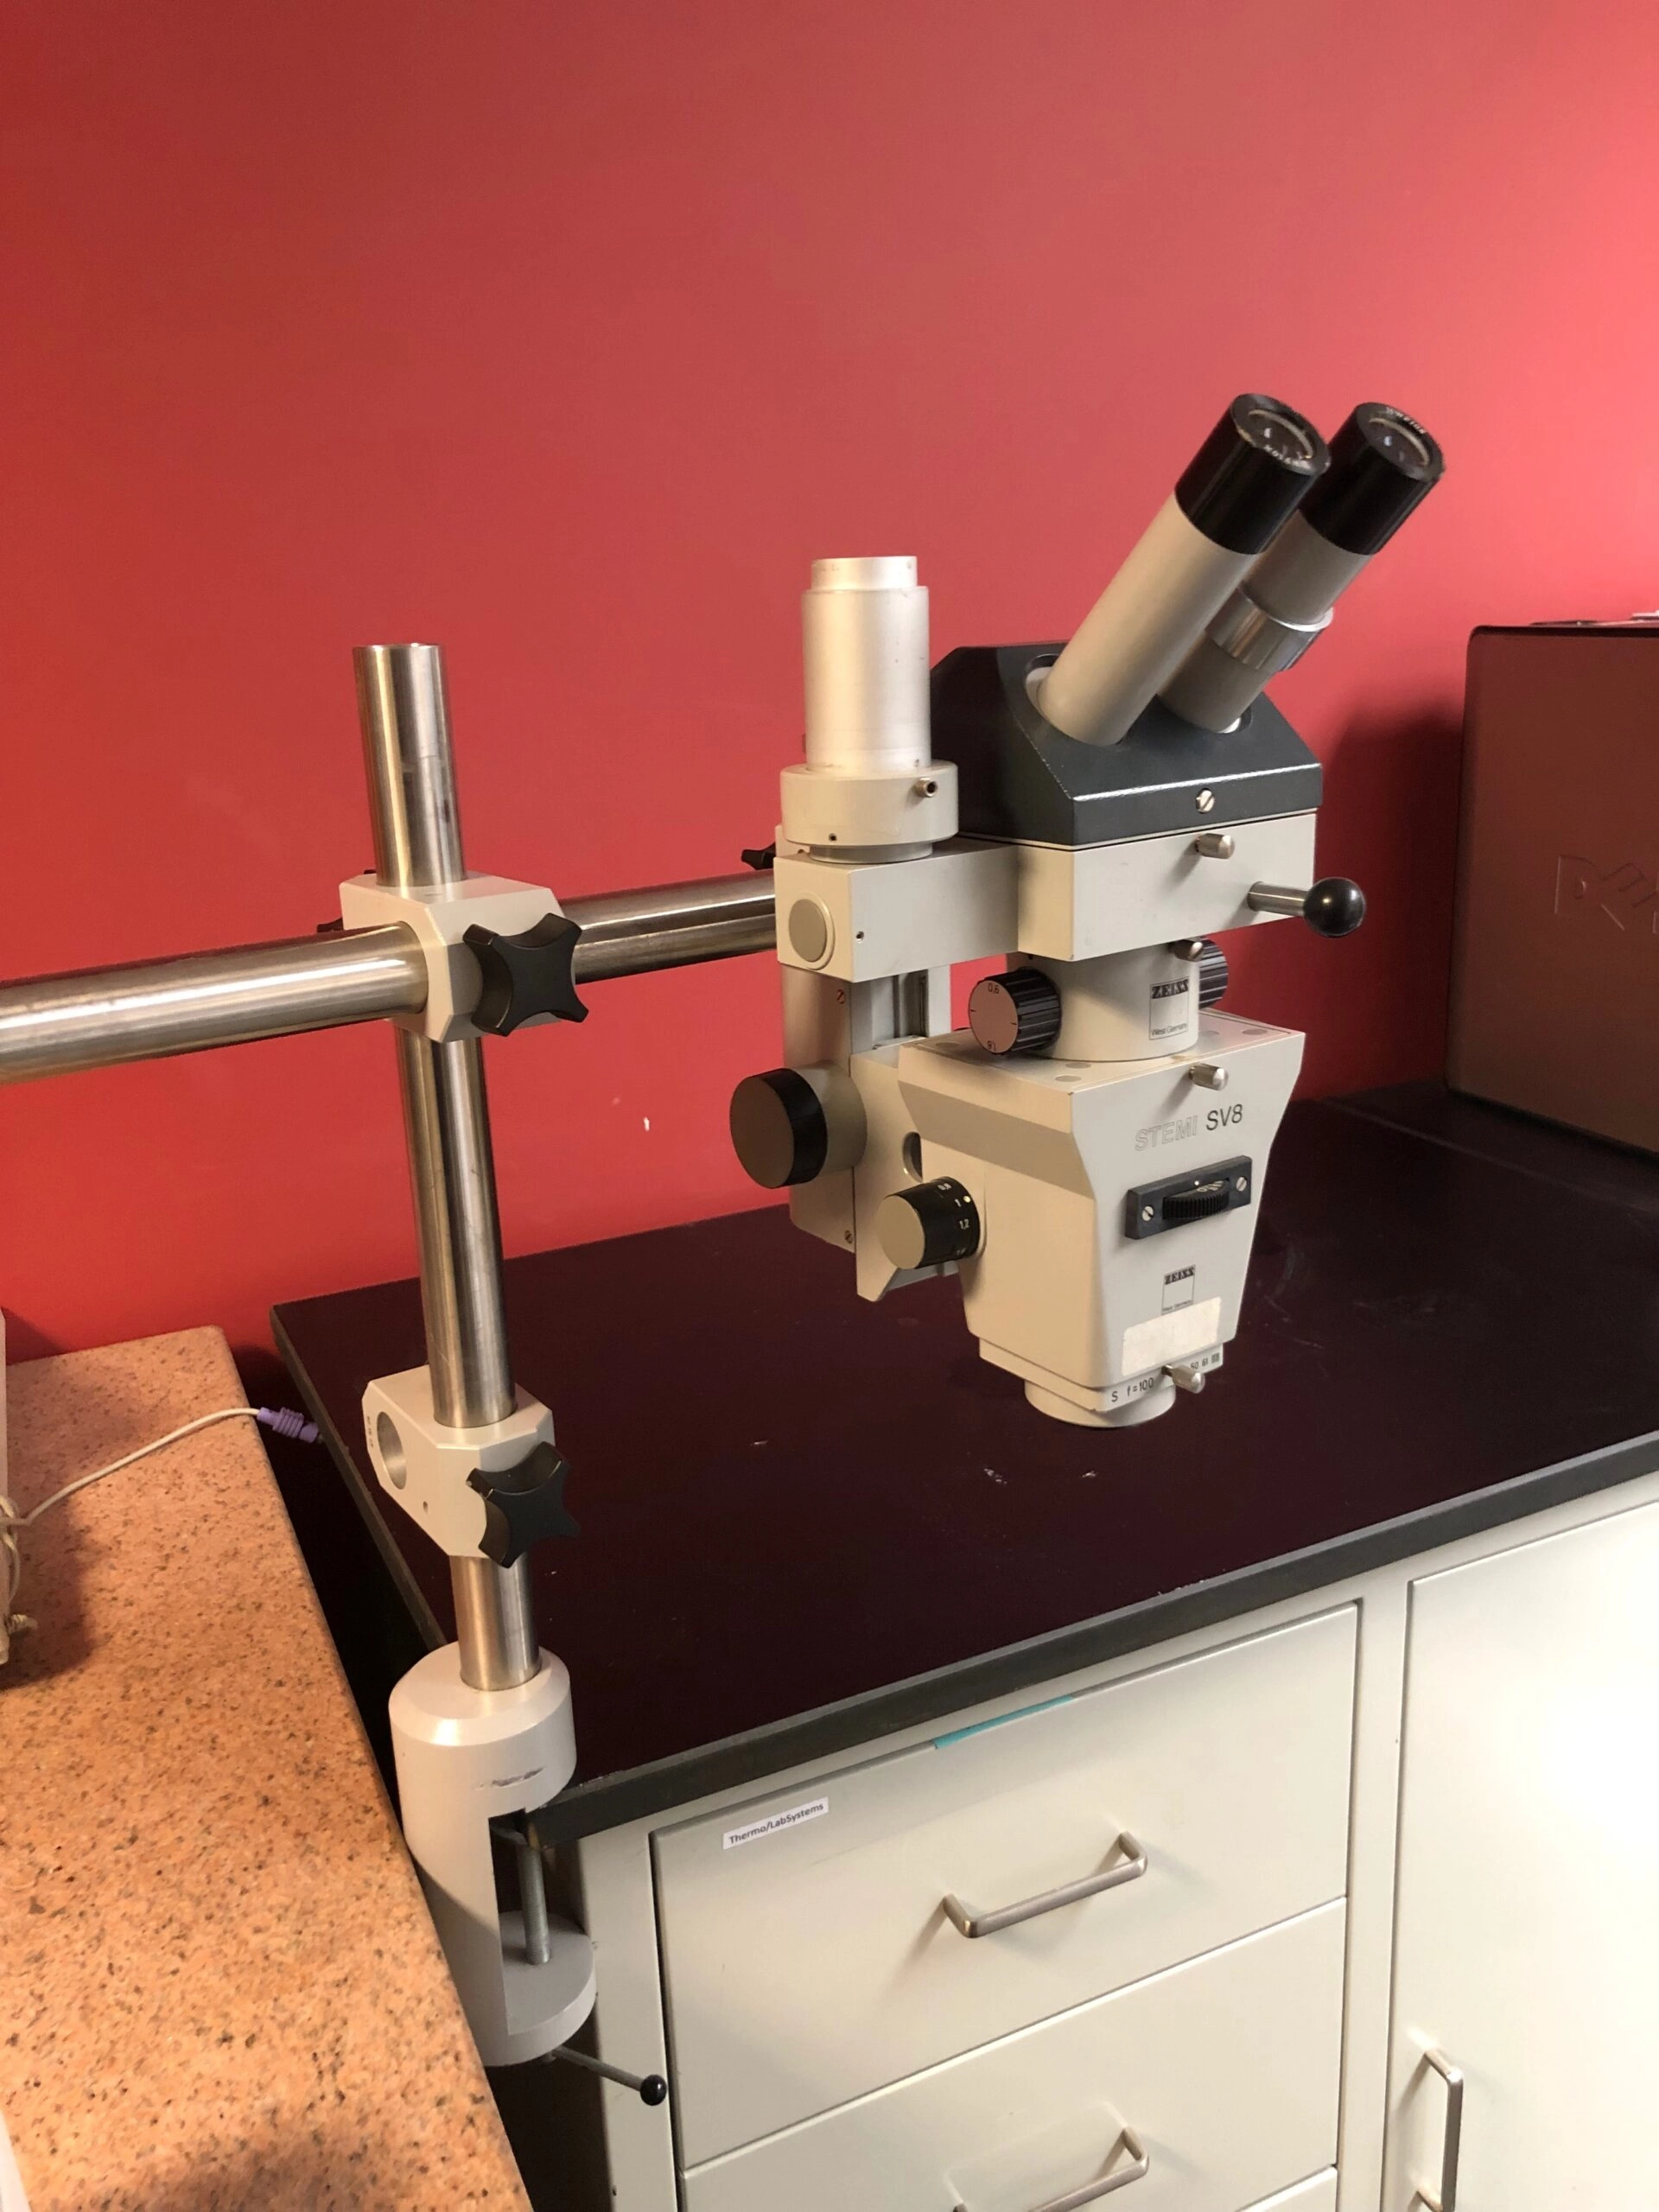 Zeiss Stemi SV8 Stereo/Dissecting Microscope